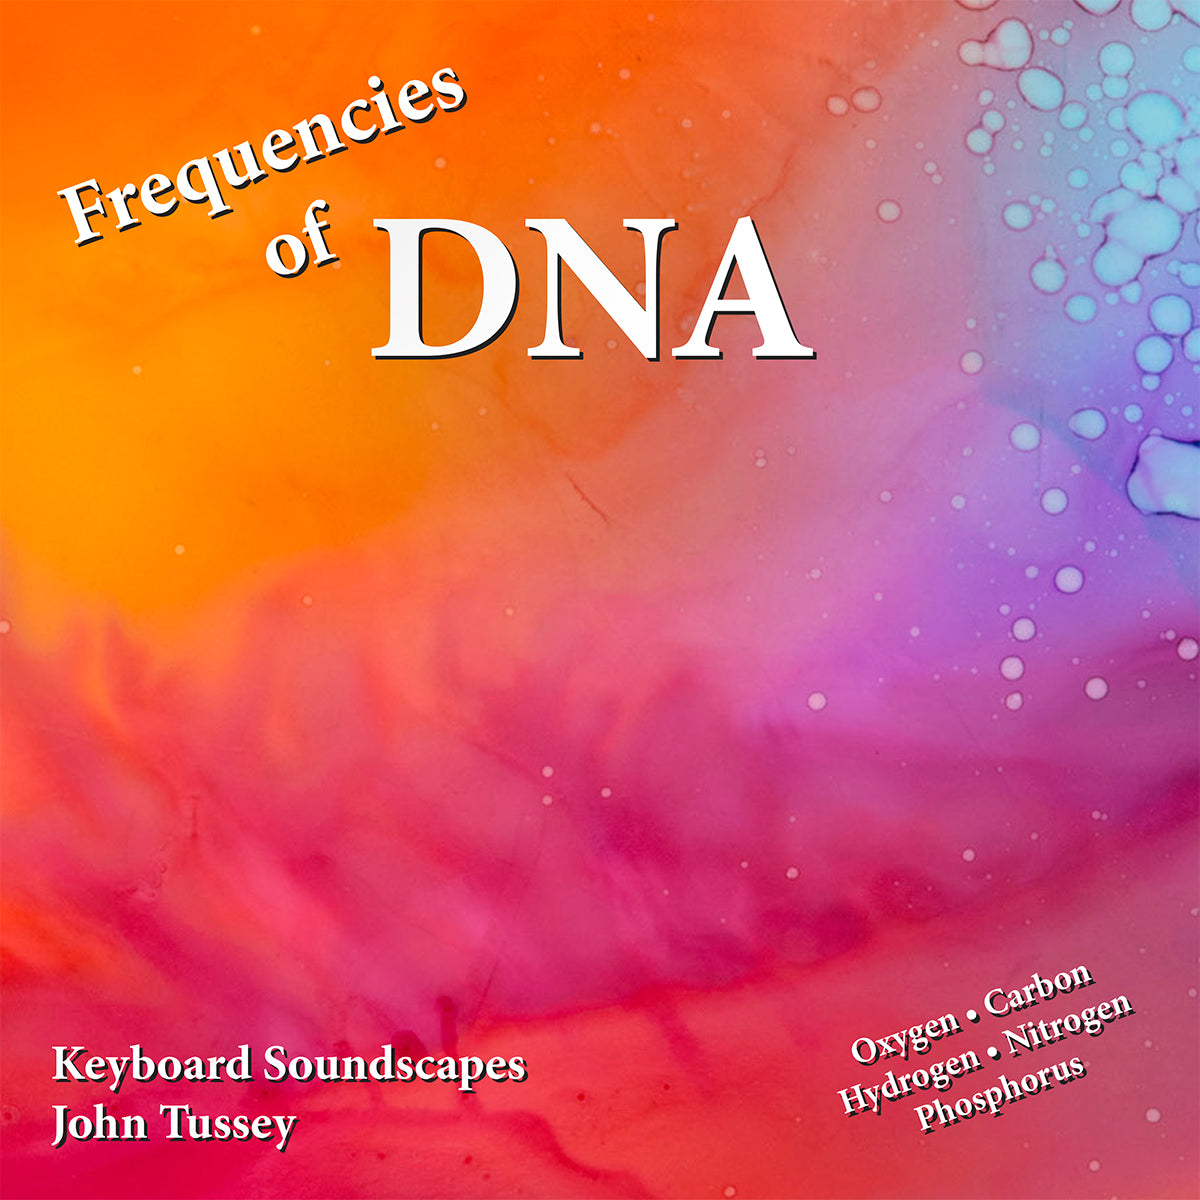 Frequencies of DNA CD